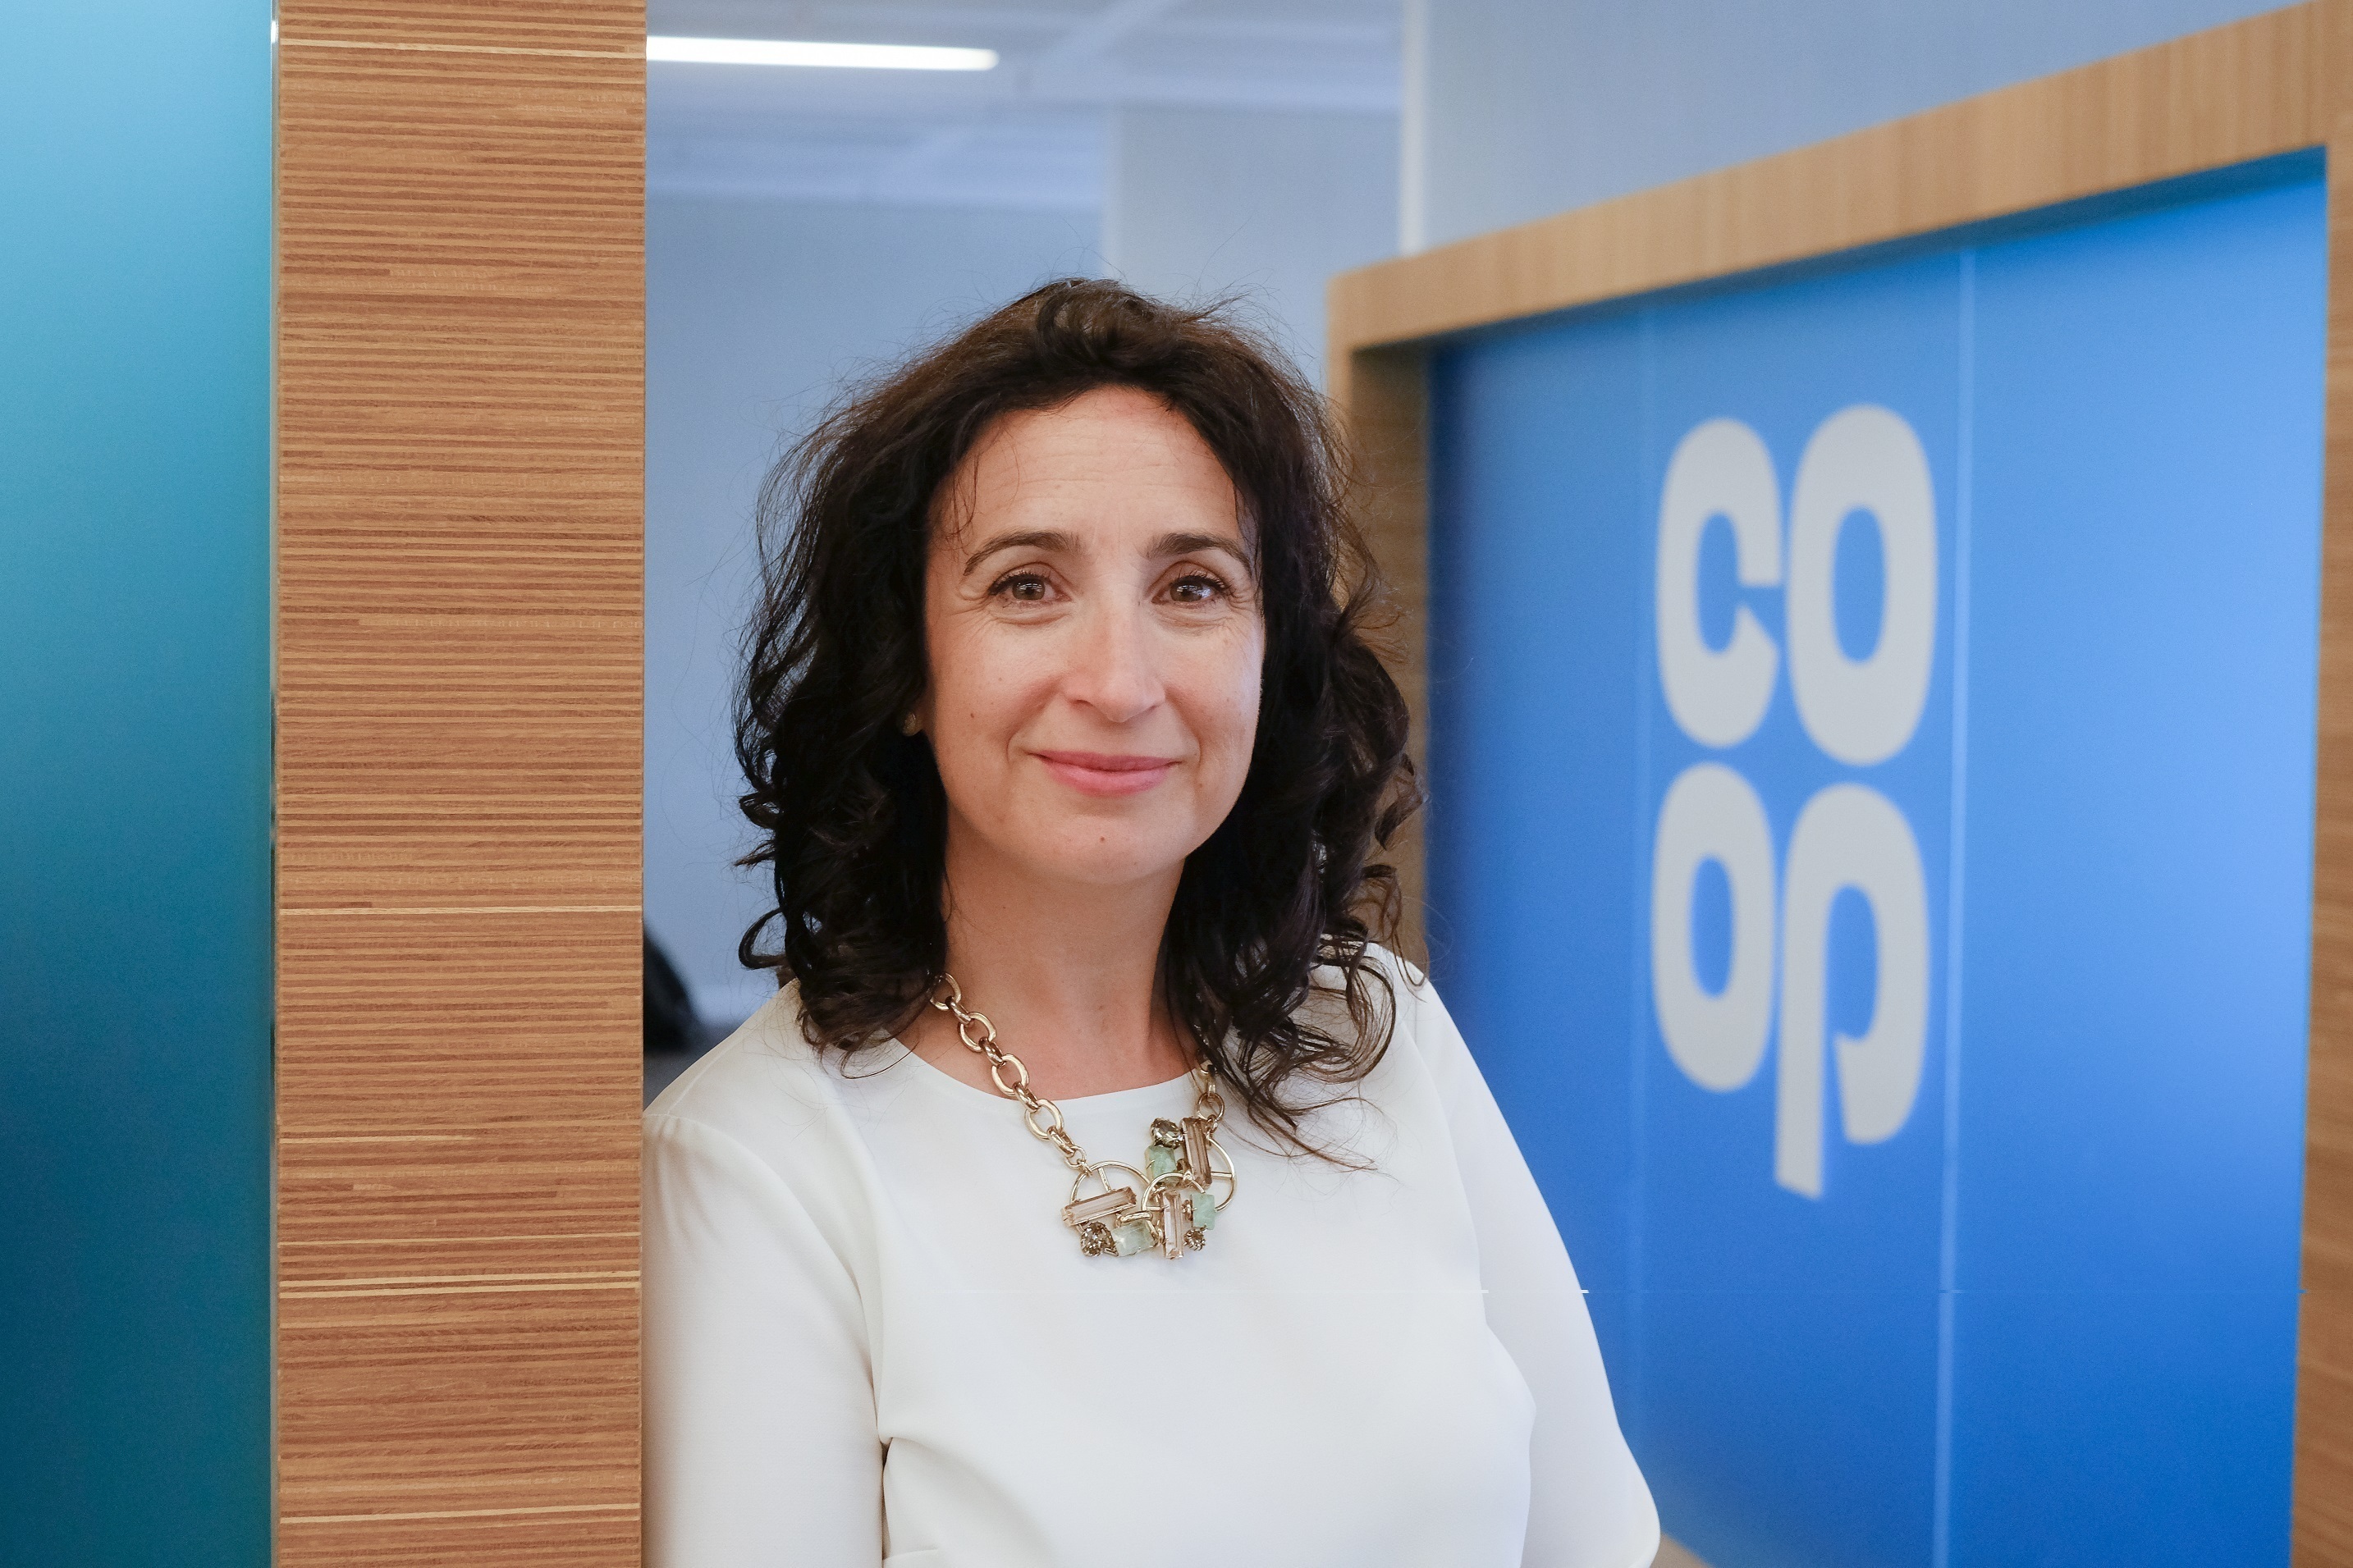 Co-op Food's chief executive Jo Whitfield (Co-op/PA Wire)